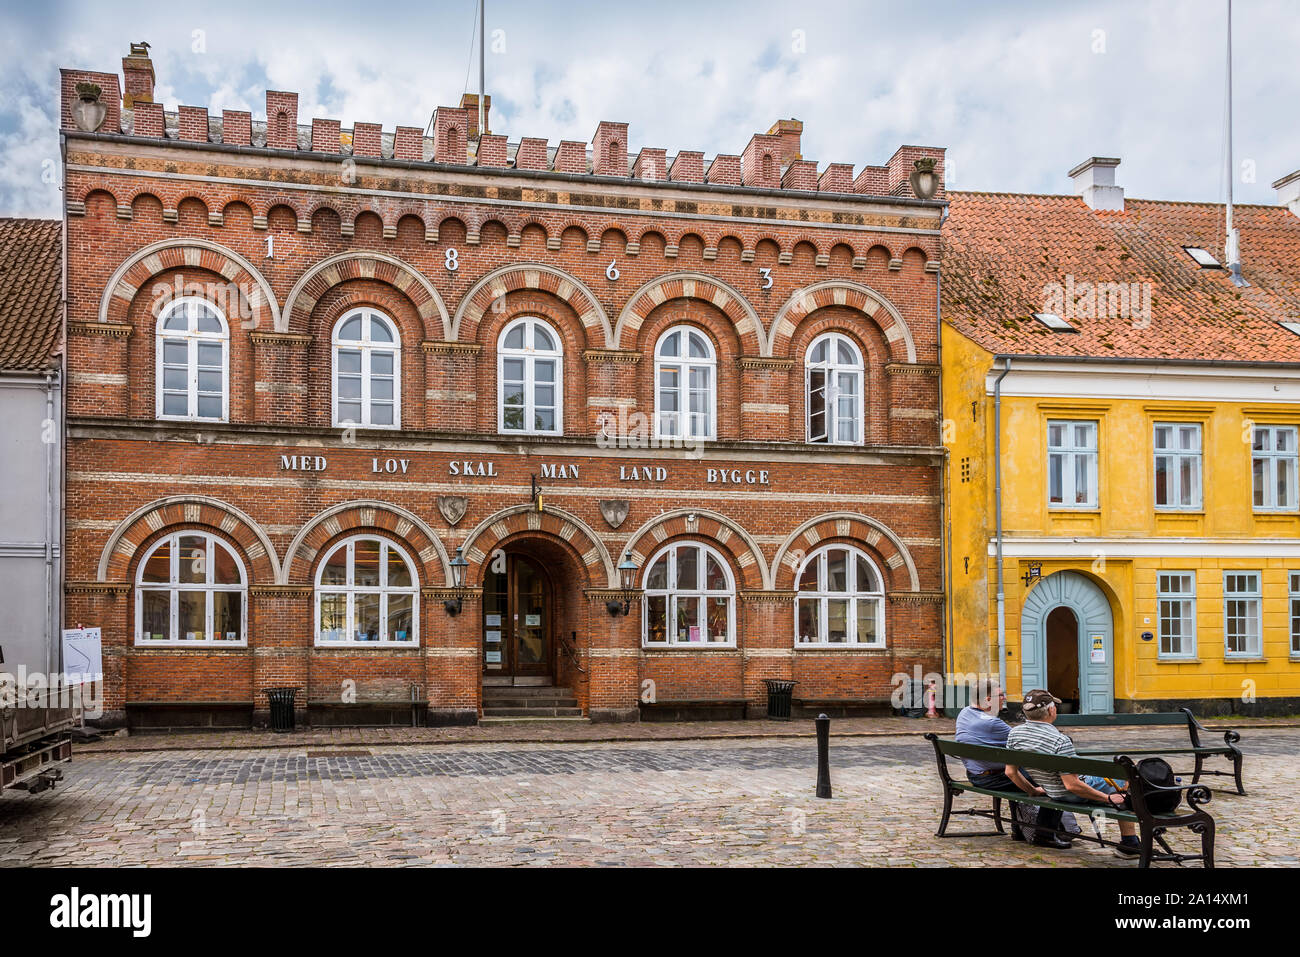 Two men sitting on a bench in front of the townhall in Ærøskøbing, Denmark, July 13, 2019 Stock Photo